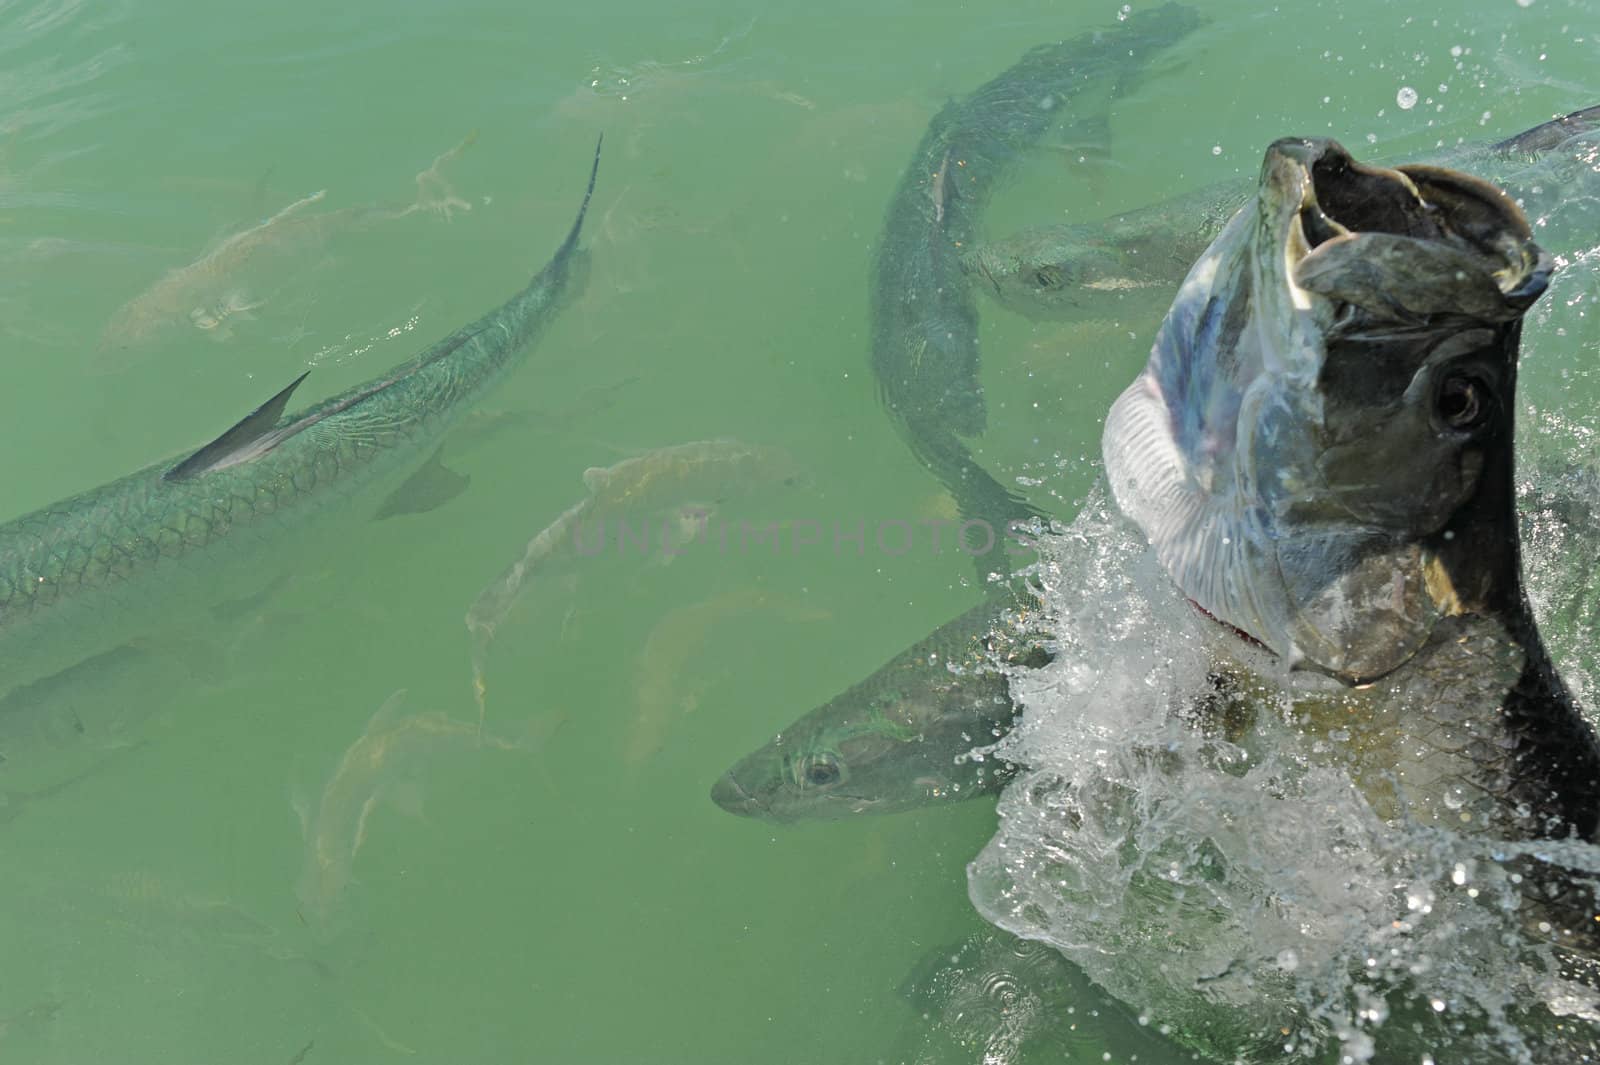 Tarpon fish jumping out of water with other tarpons swimming nea by ftlaudgirl